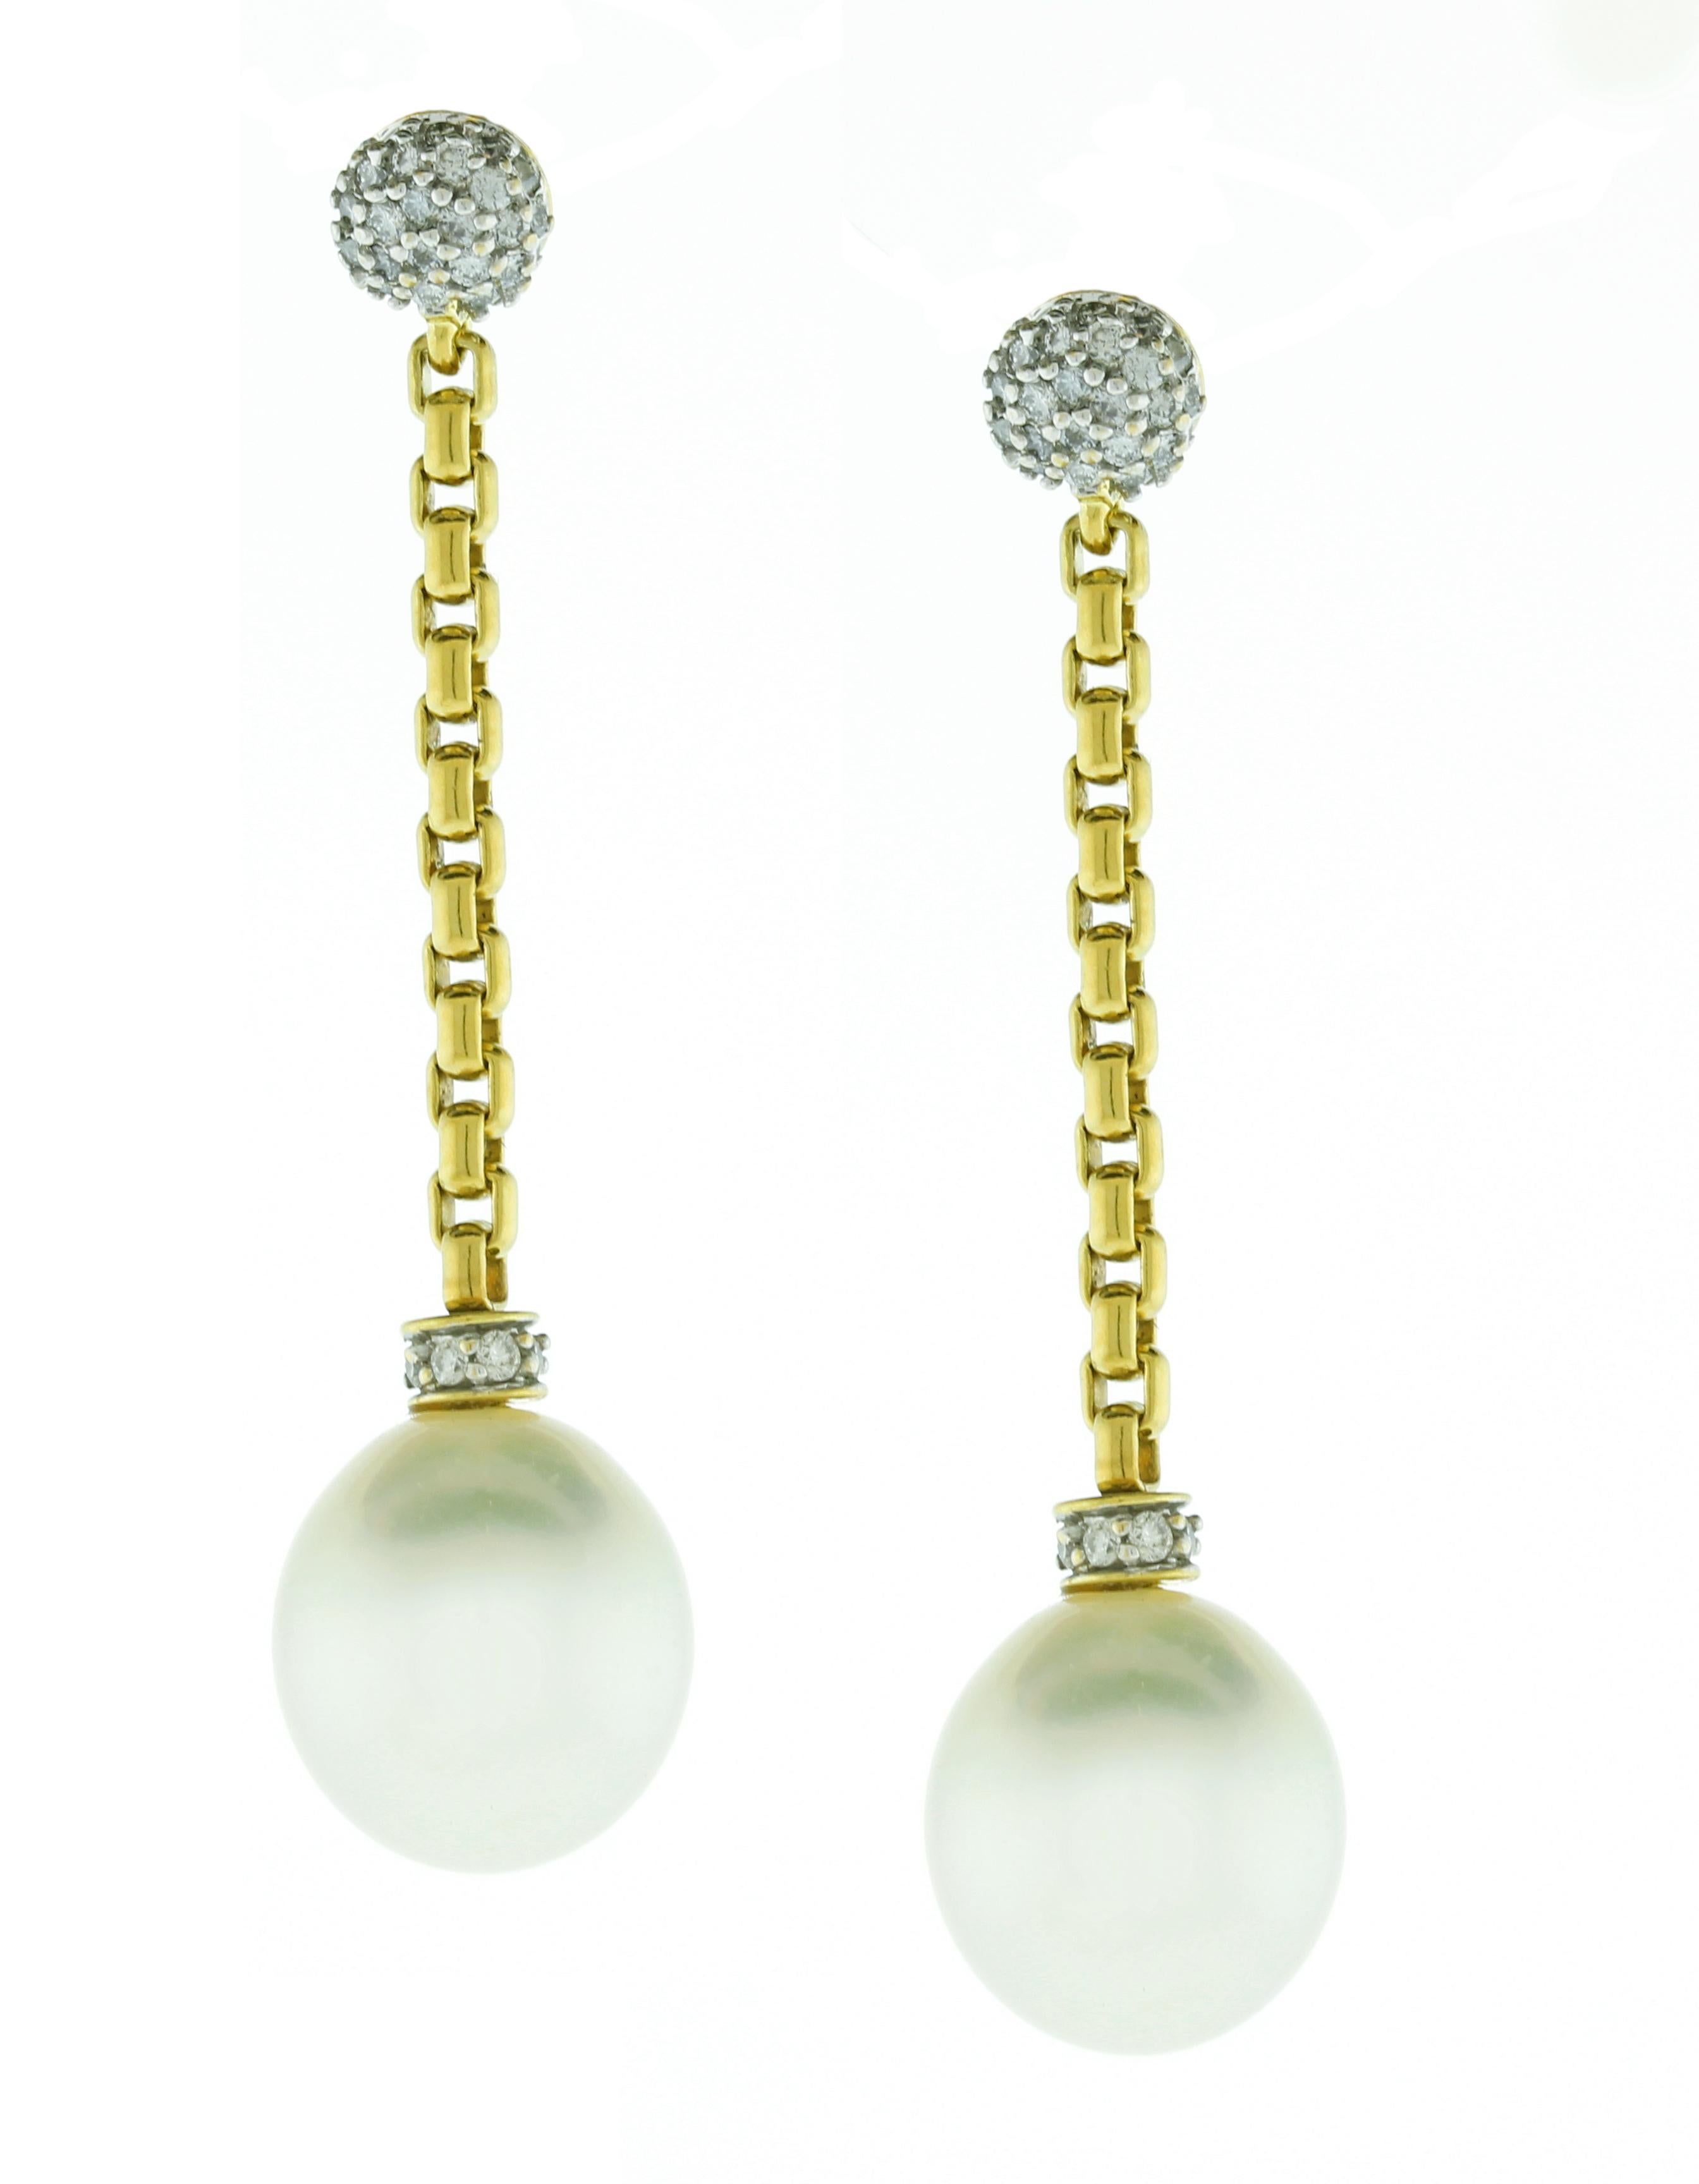 From David Yurman, these earrings are from the Solari collection.
• Designer: David Yurman
• Metal: 18kt Yellow and White Gold
• Circa: 2020s
• Gemstone: Diamond and pearls
• Diamond weight: 70D= approx. .35cts
• Length = 2 inch
• Packaging: